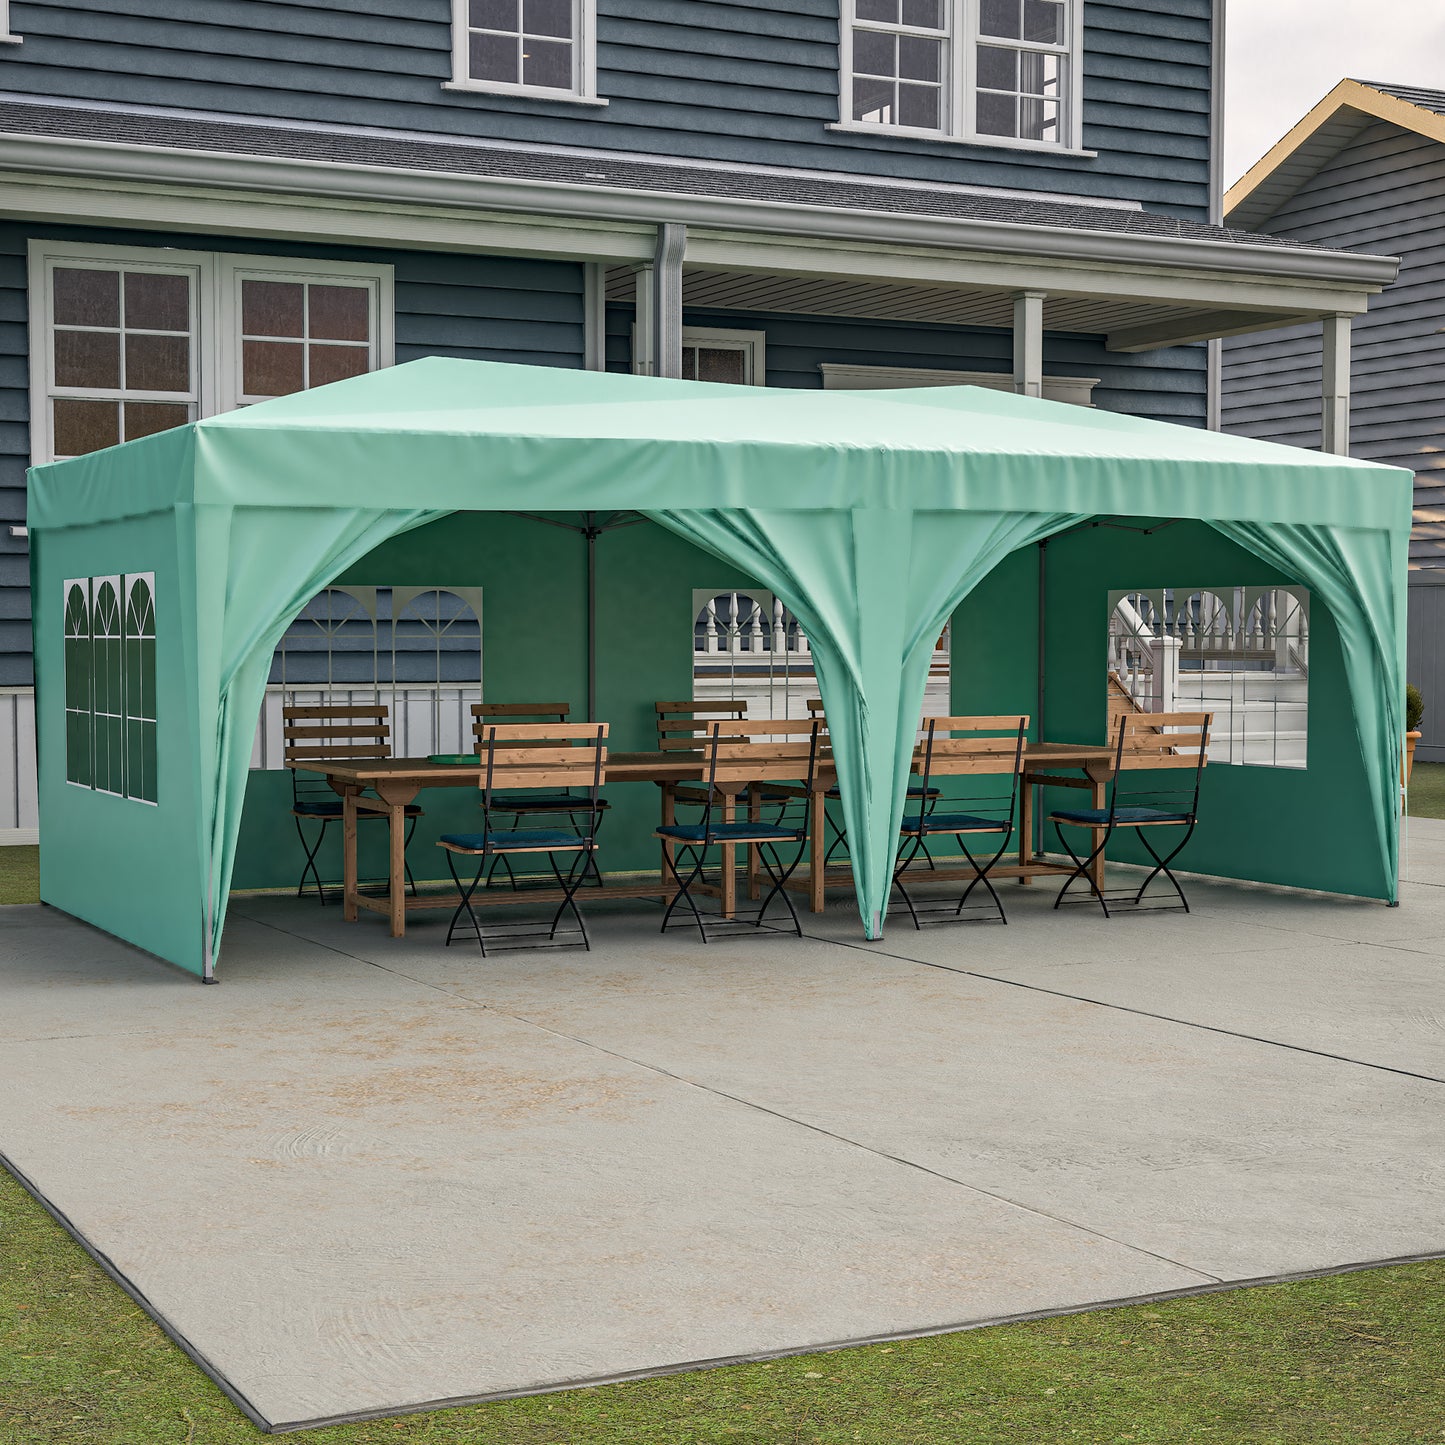 10'x20' Pop Up Canopy Outdoor Portable Party Folding Tent Green